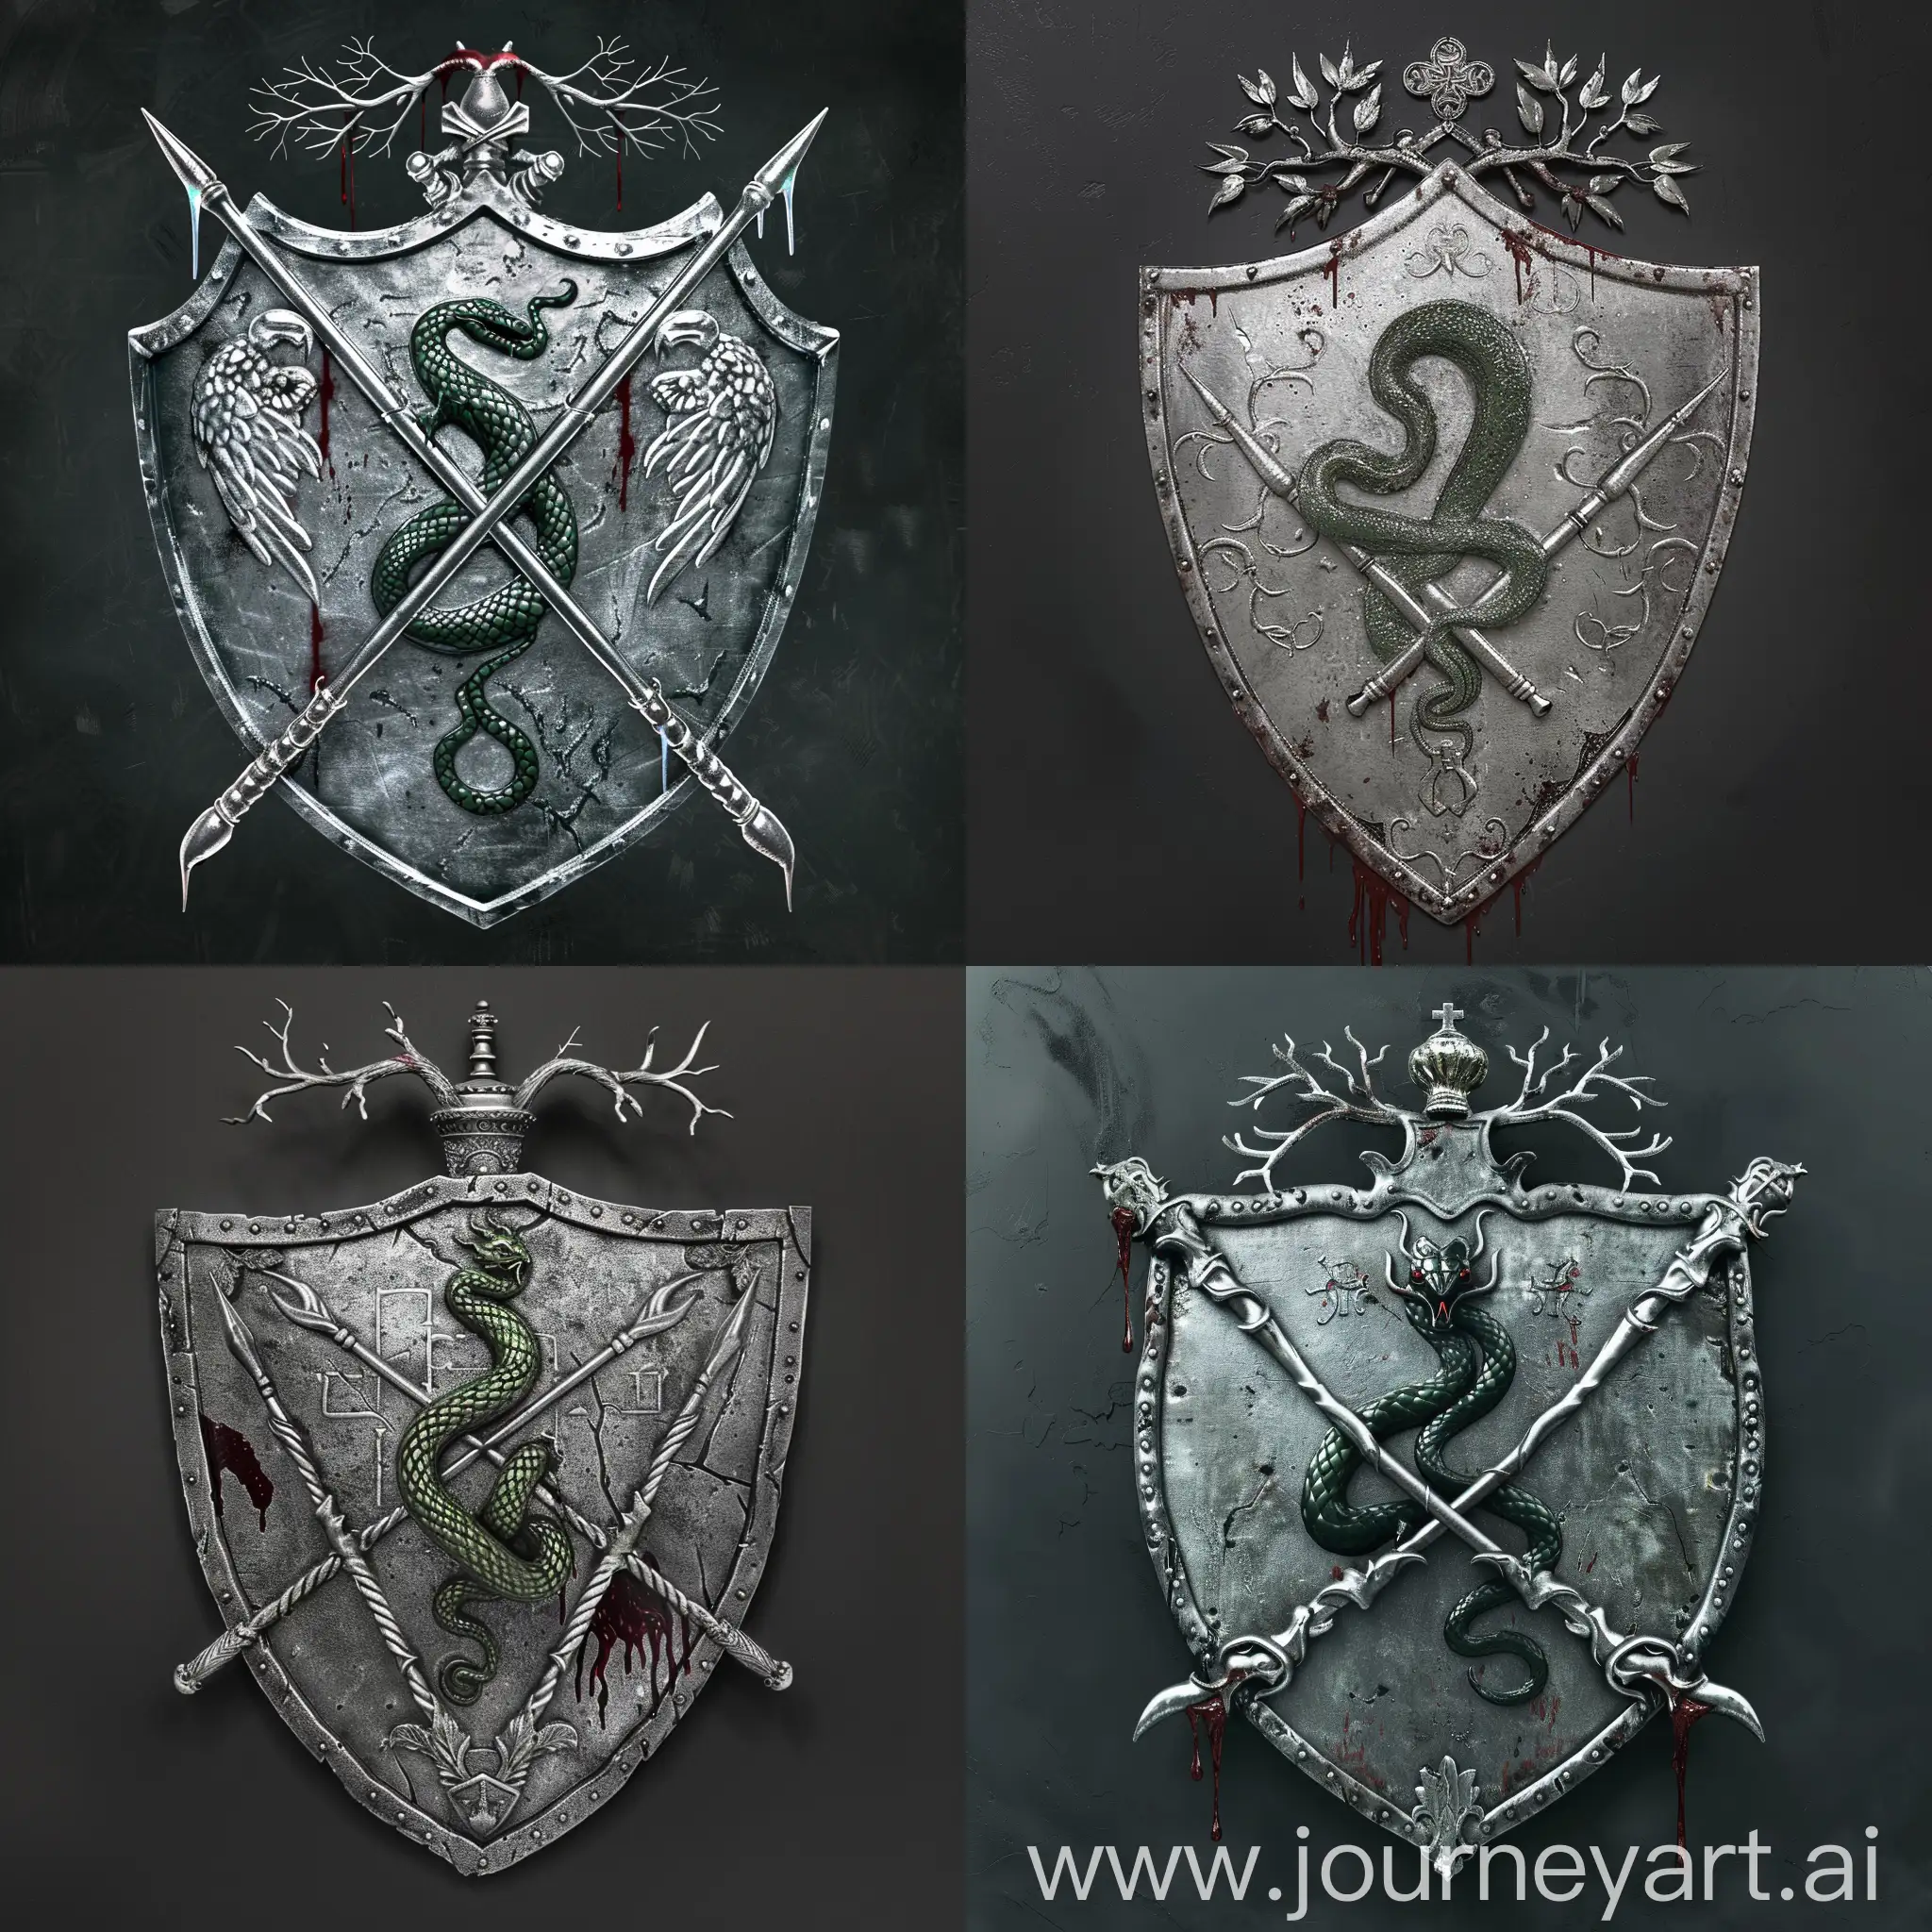 coat of arms on the shield, silver, two crossed magic wands, an emerald serpent in the center, elder branches at the top, blood dripping from the shield